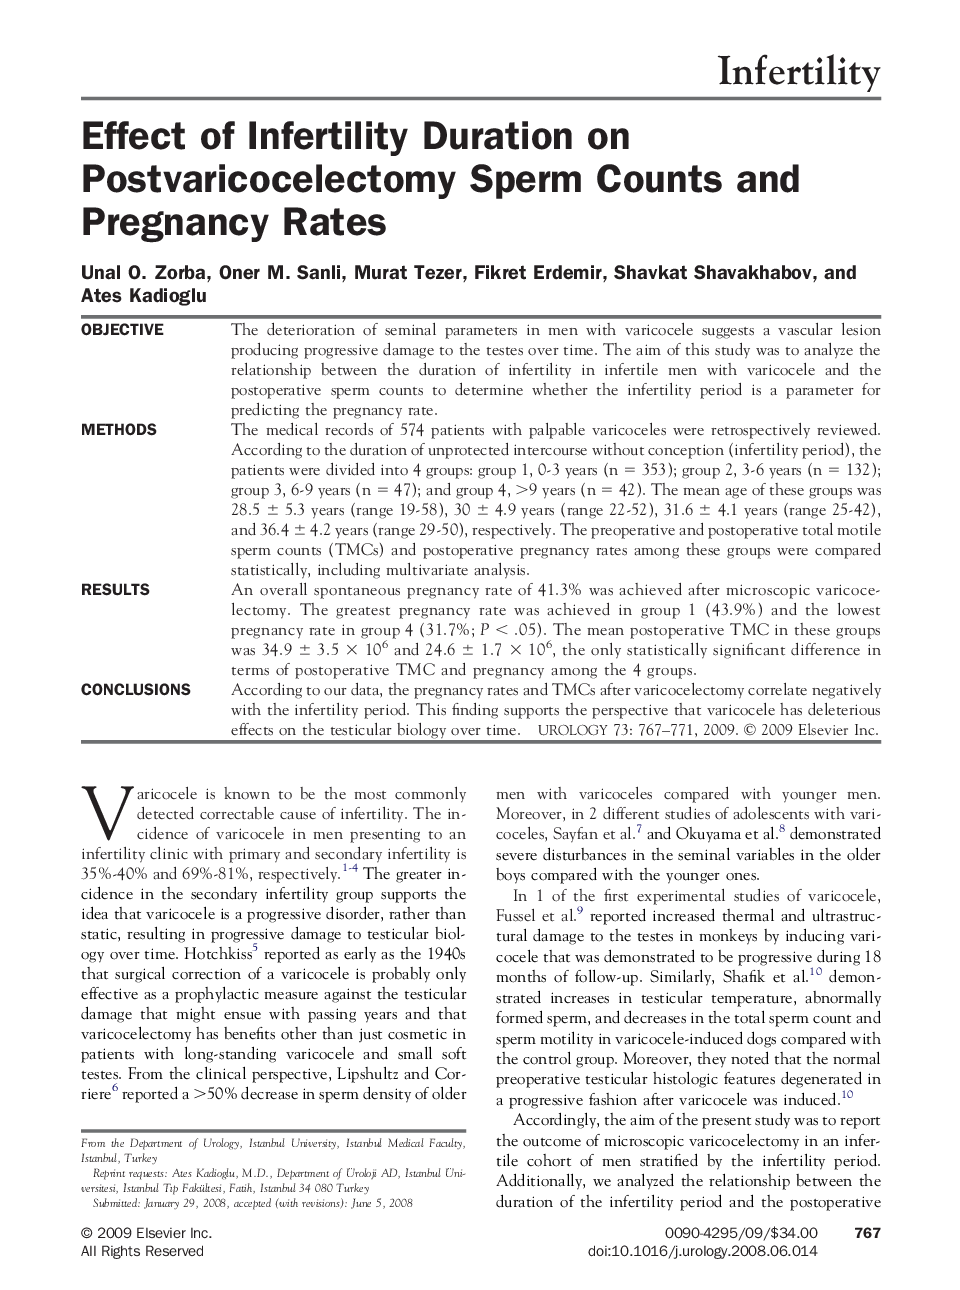 Effect of Infertility Duration on Postvaricocelectomy Sperm Counts and Pregnancy Rates